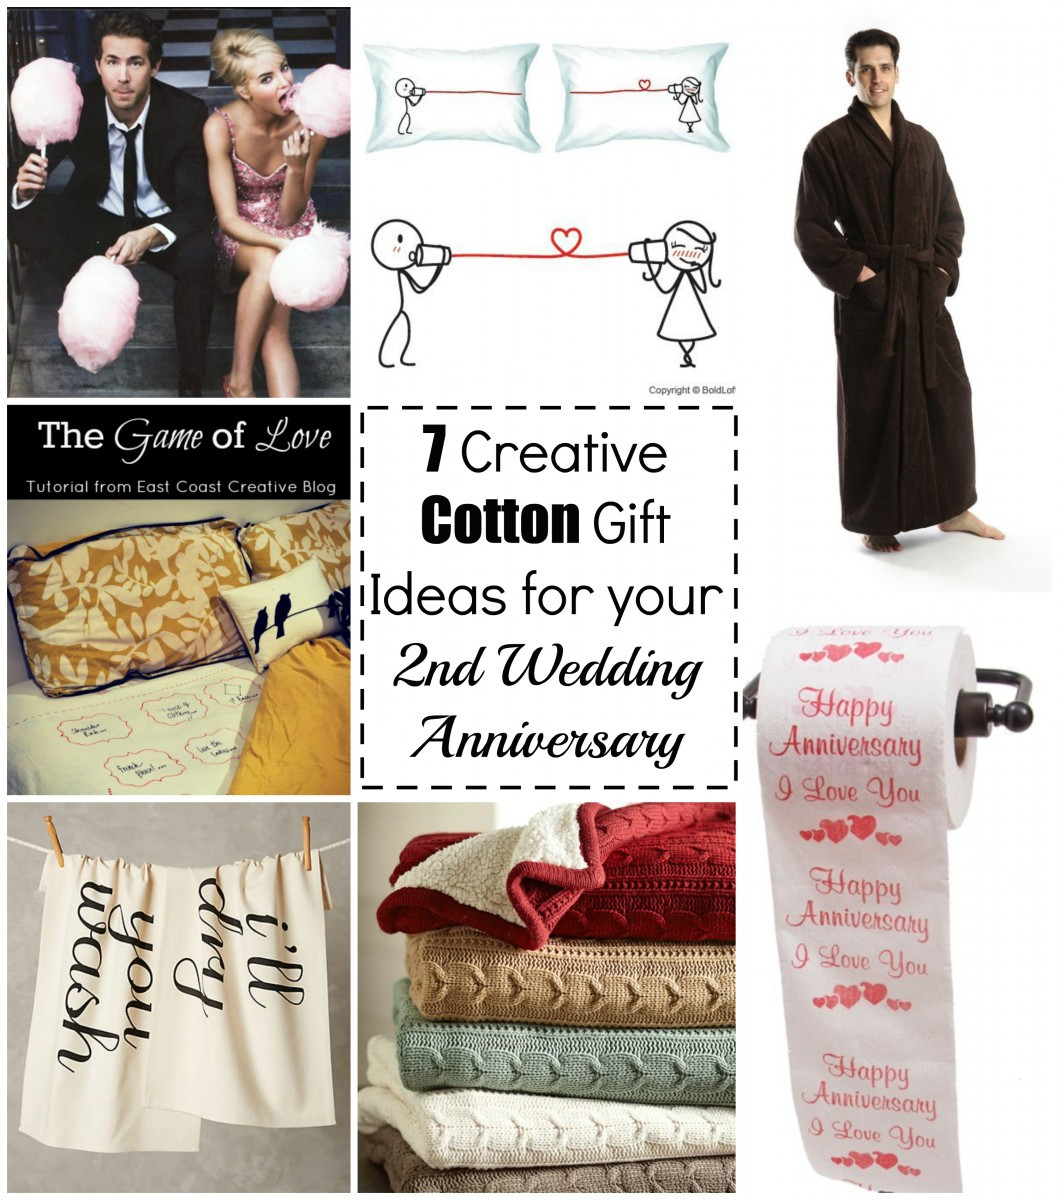 Cotton Anniversary Gift Ideas For Her
 7 Cotton Gift Ideas for your 2nd Wedding Anniversary